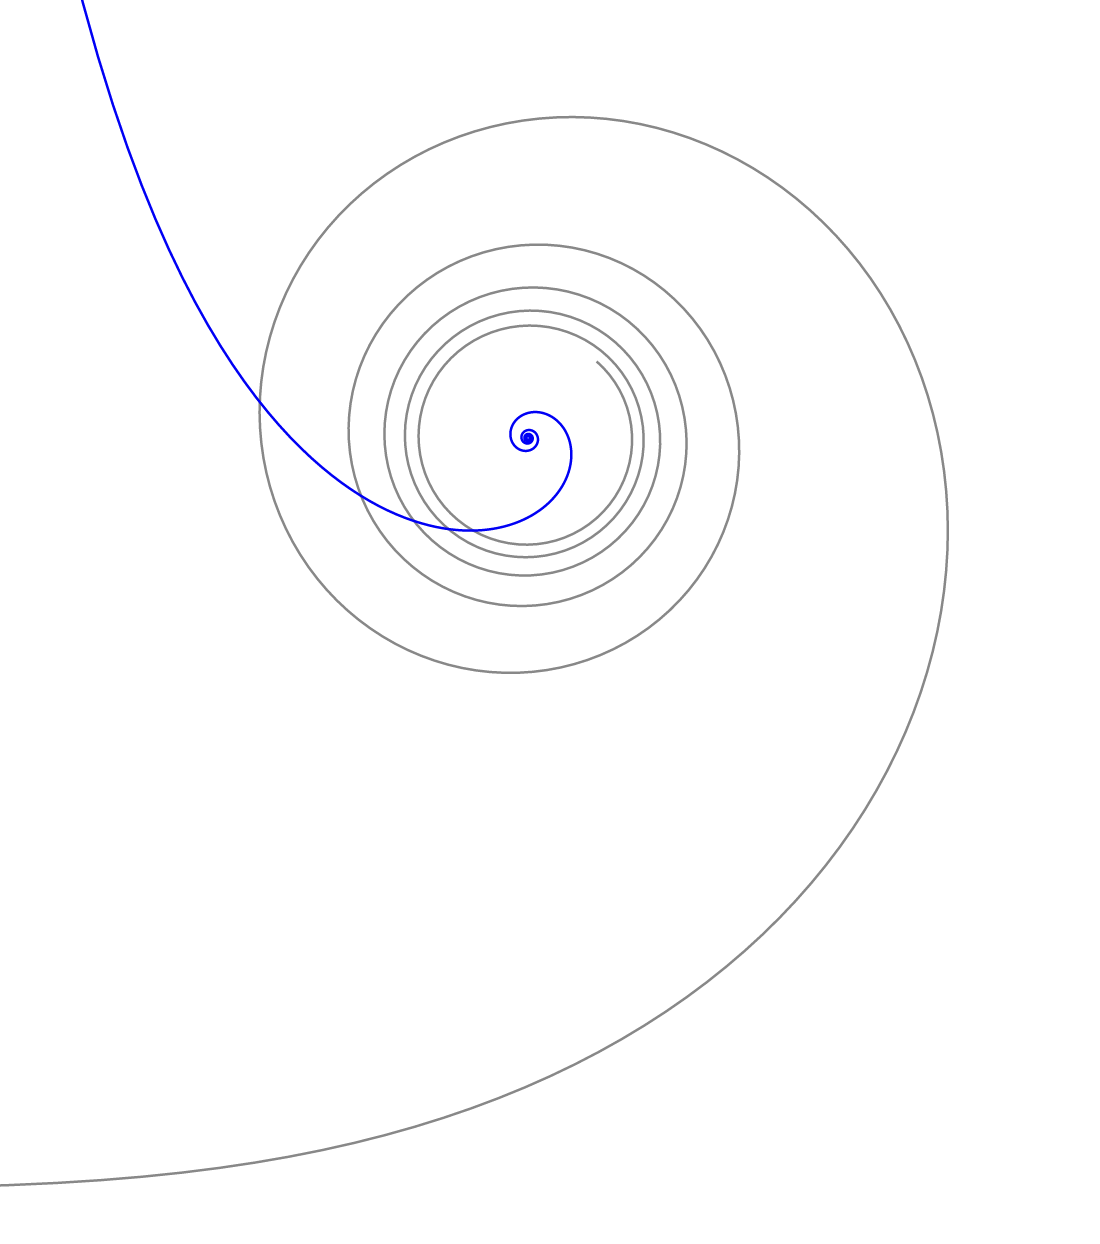 Image of Euler spiral and its evolute